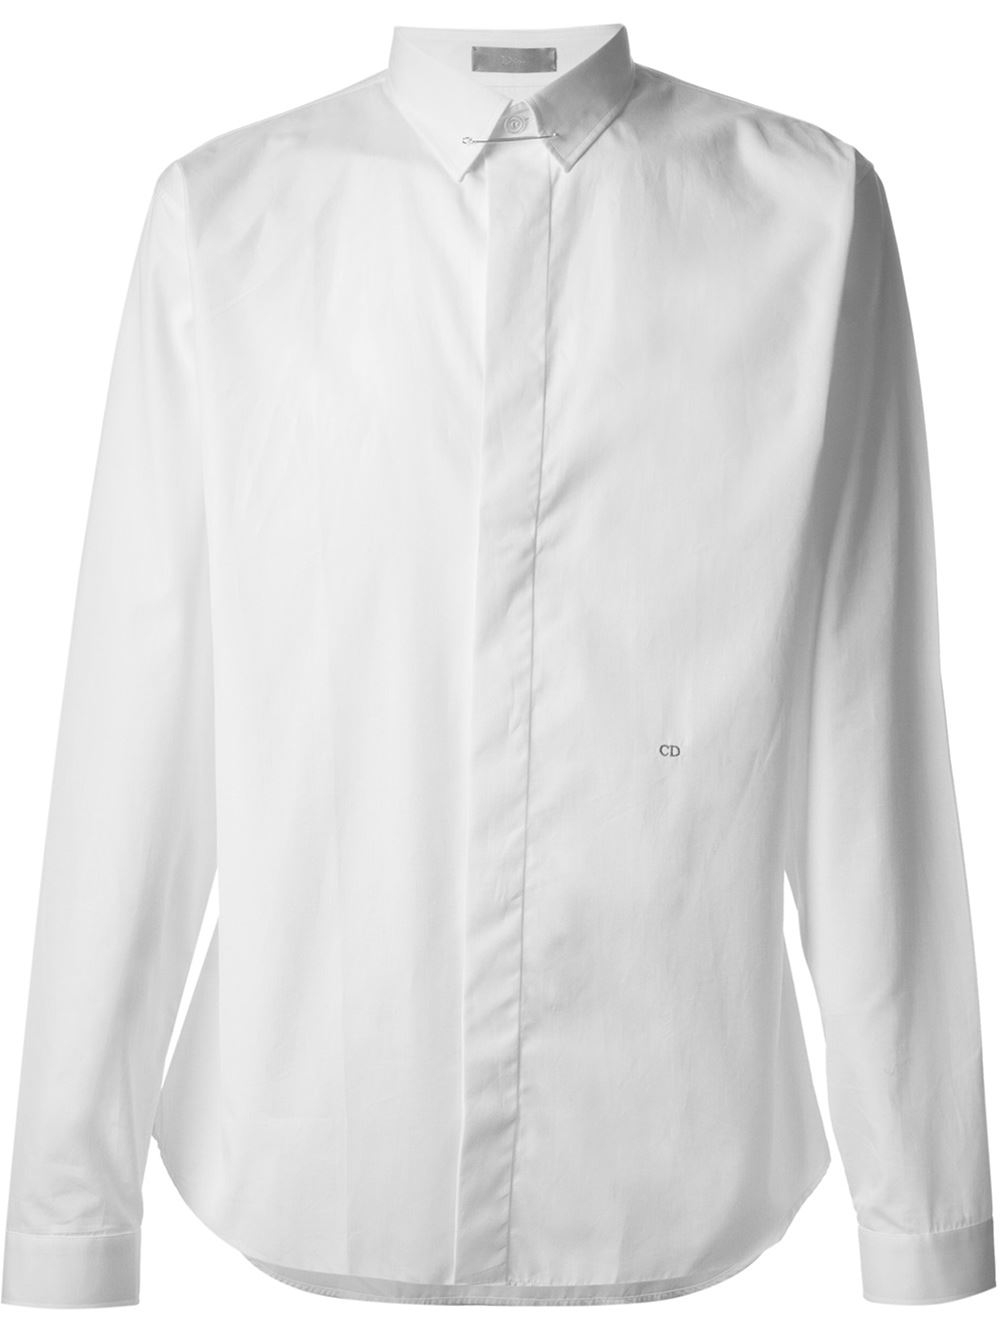 Lyst - Dior Homme Pin Collar Shirt in White for Men